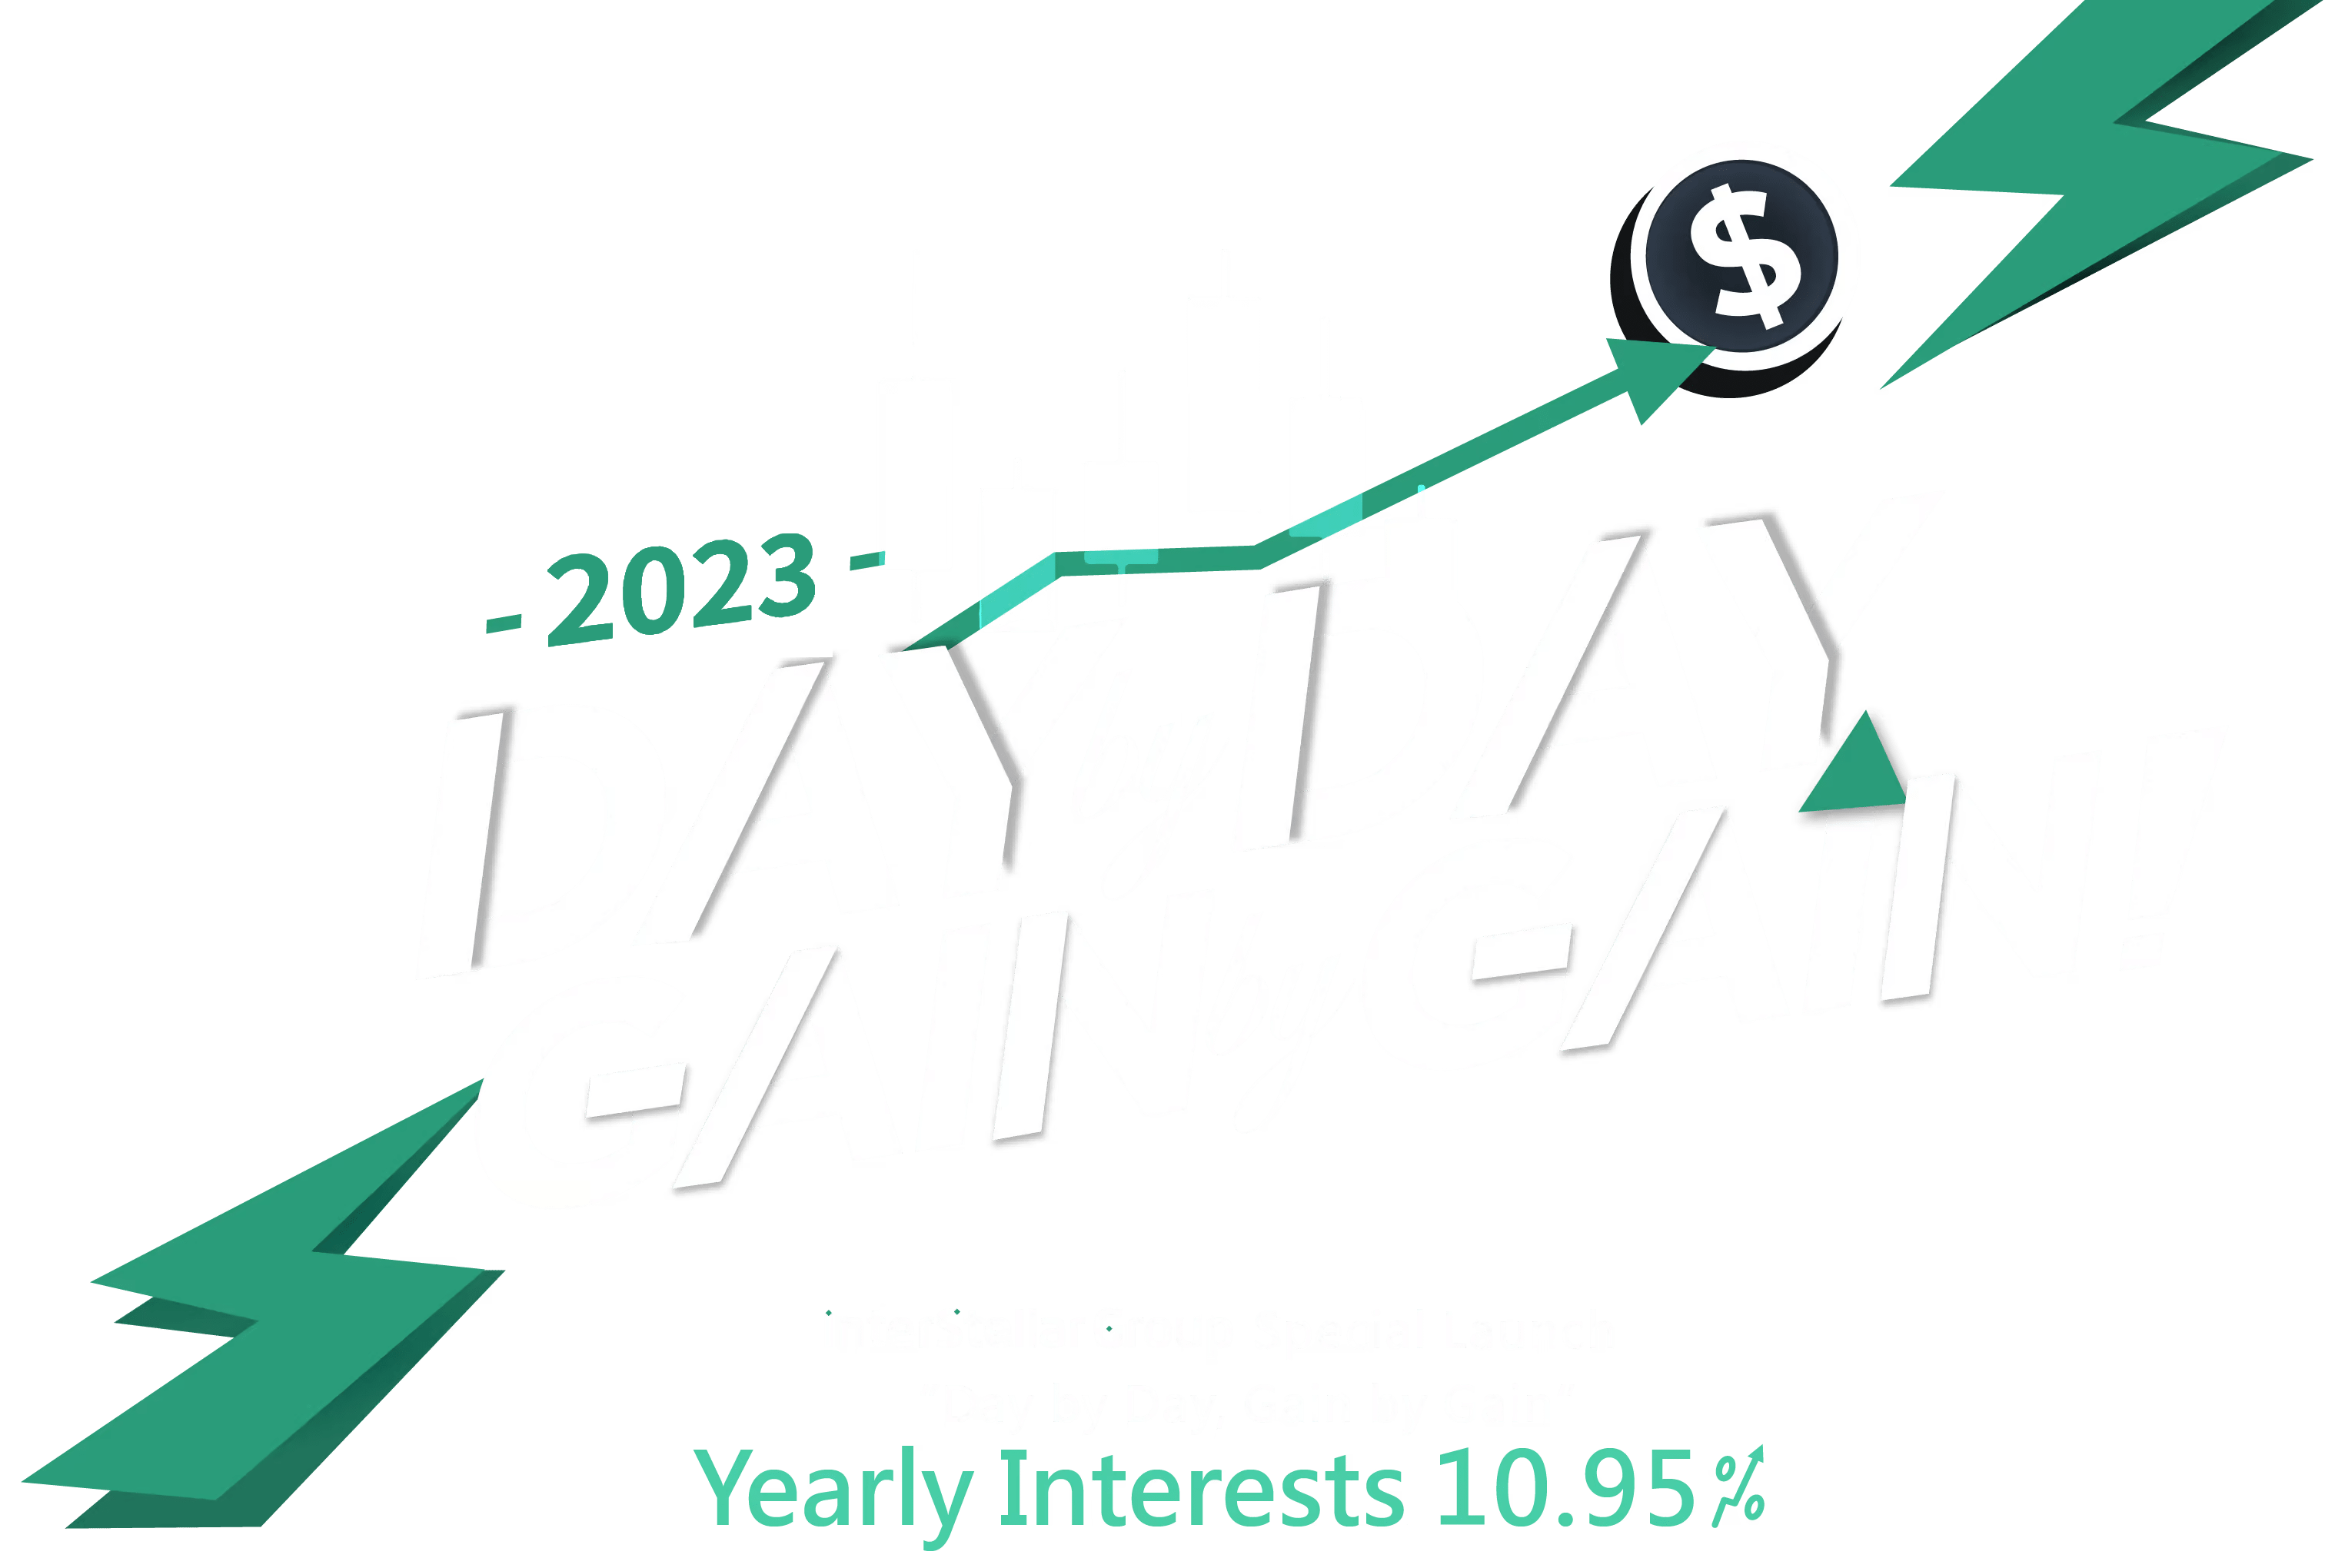 2023 Day by Day! Gain by Gain